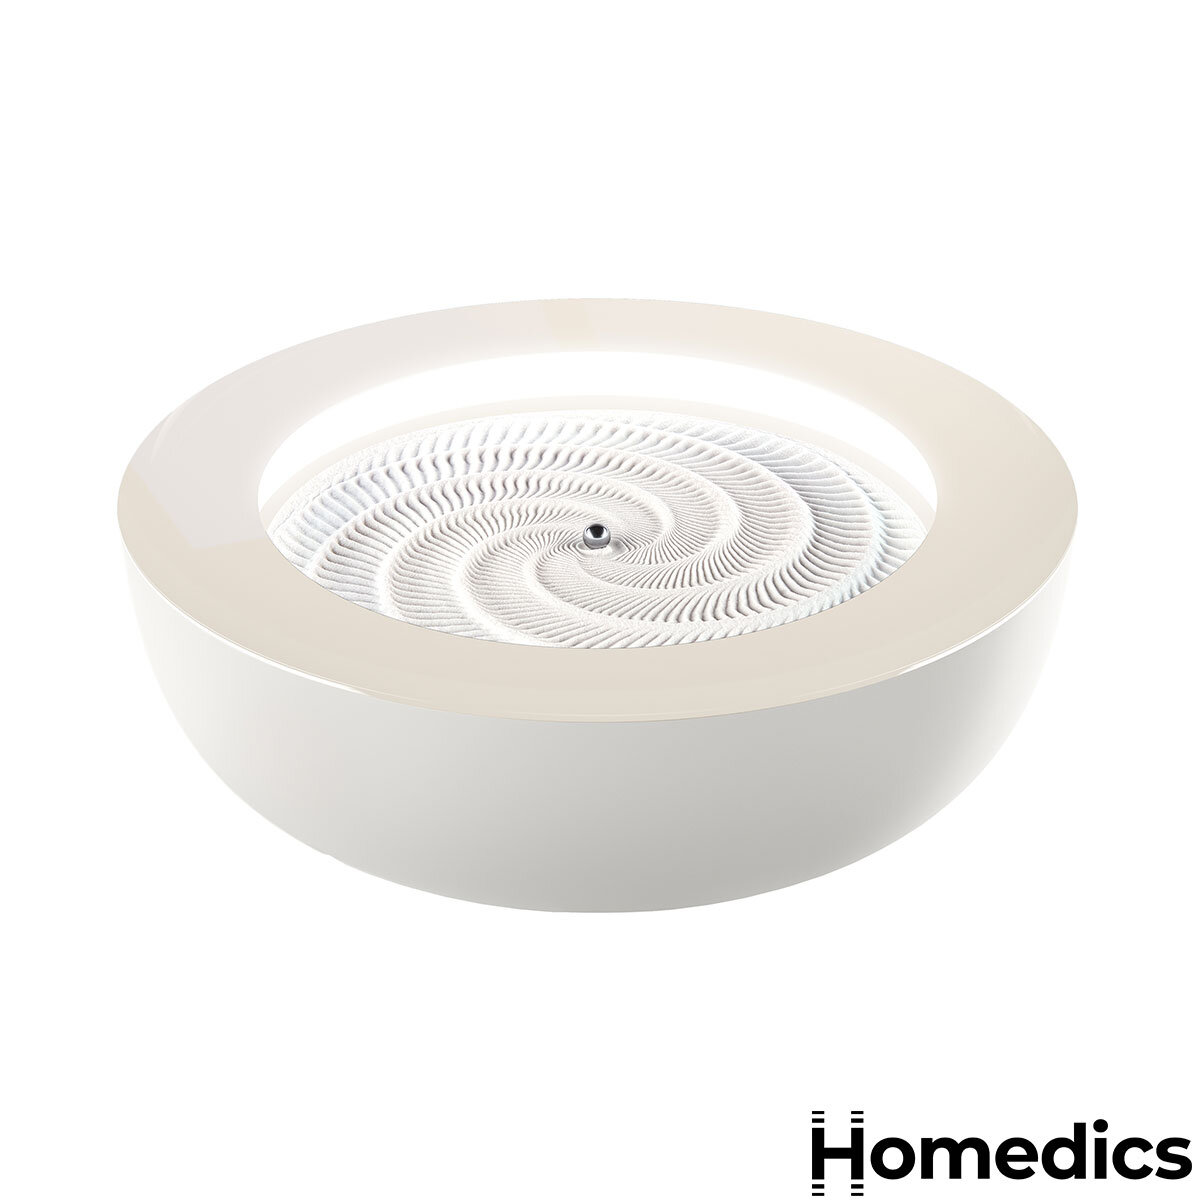 Image of Homedics Drift Sandscape table from the side